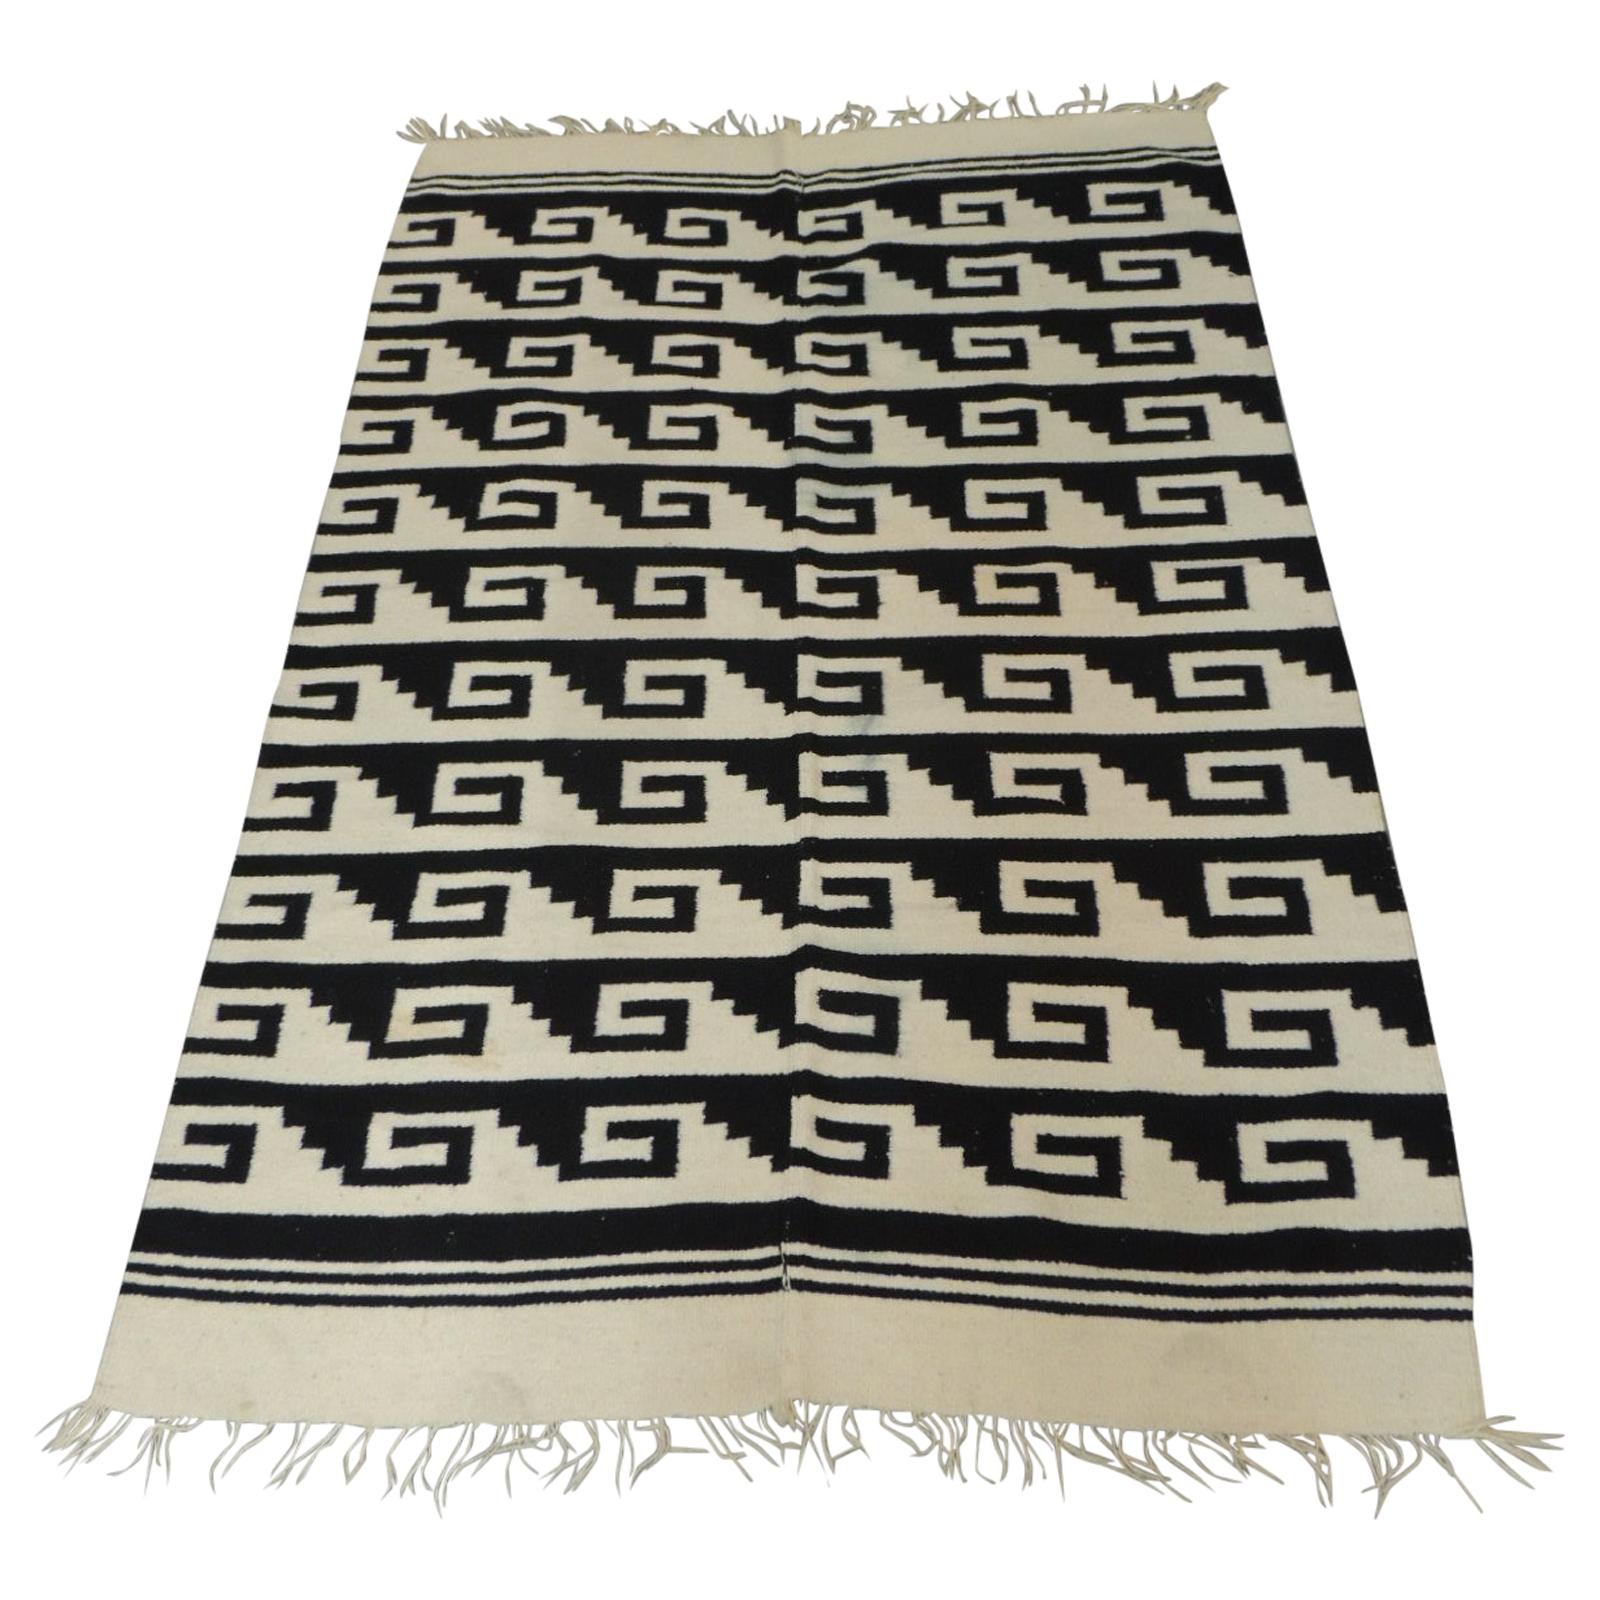 Vintage Woven Natural and Black Peruvian Flat-Weave Rug or Throw